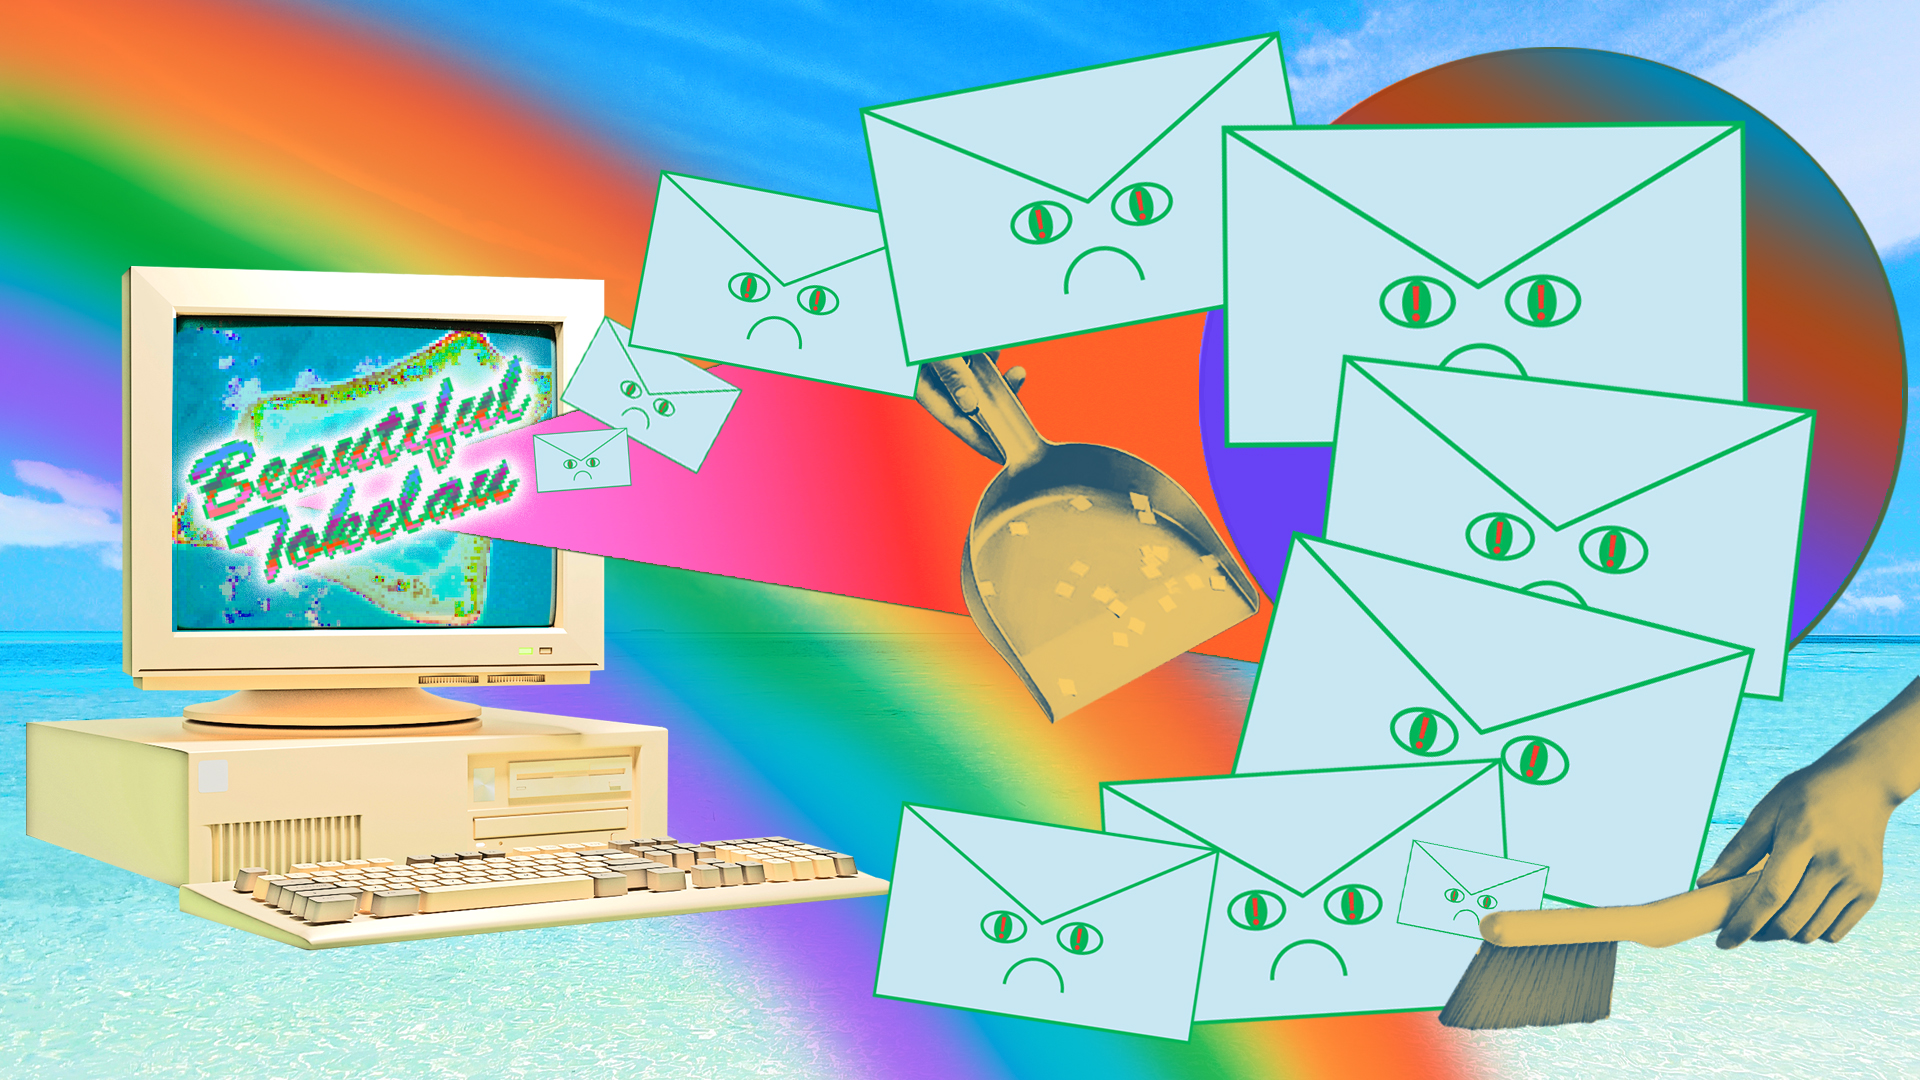 an older 90s style computer with an image of &quot;Beautiful Tokelau&quot; emits spam emails with a hand holding a dust pan and brush tries to scoop them up